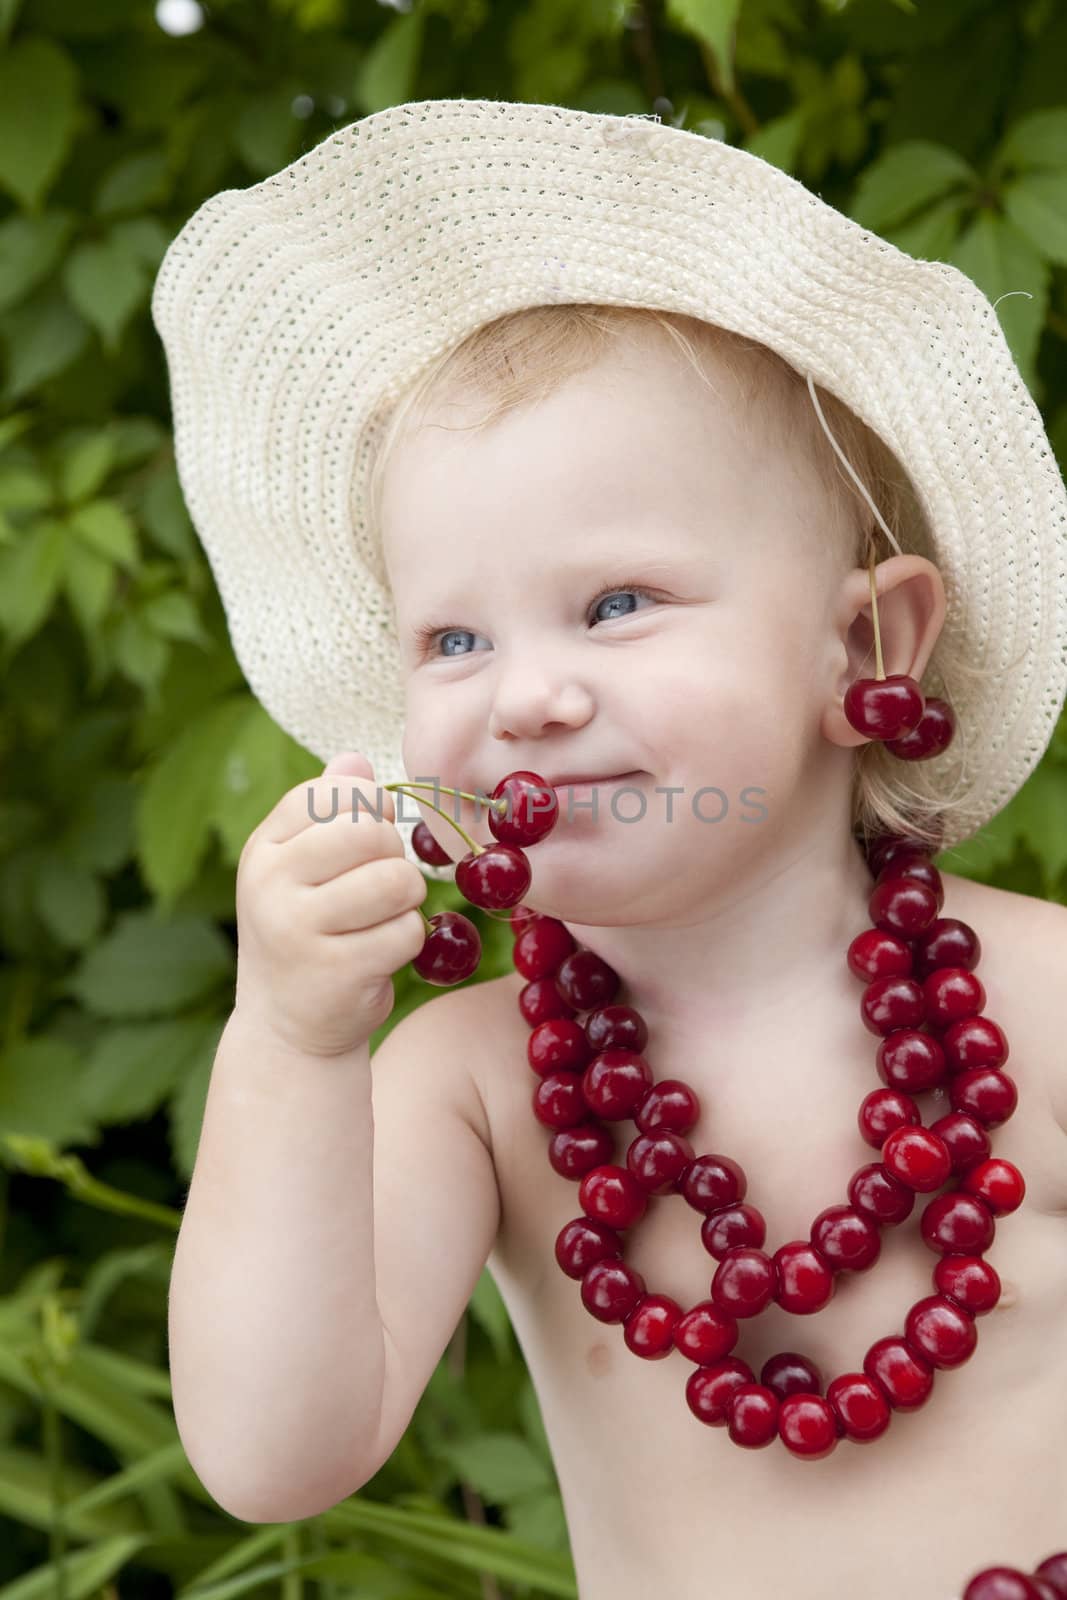 small girl with red cherry beads and earrings
